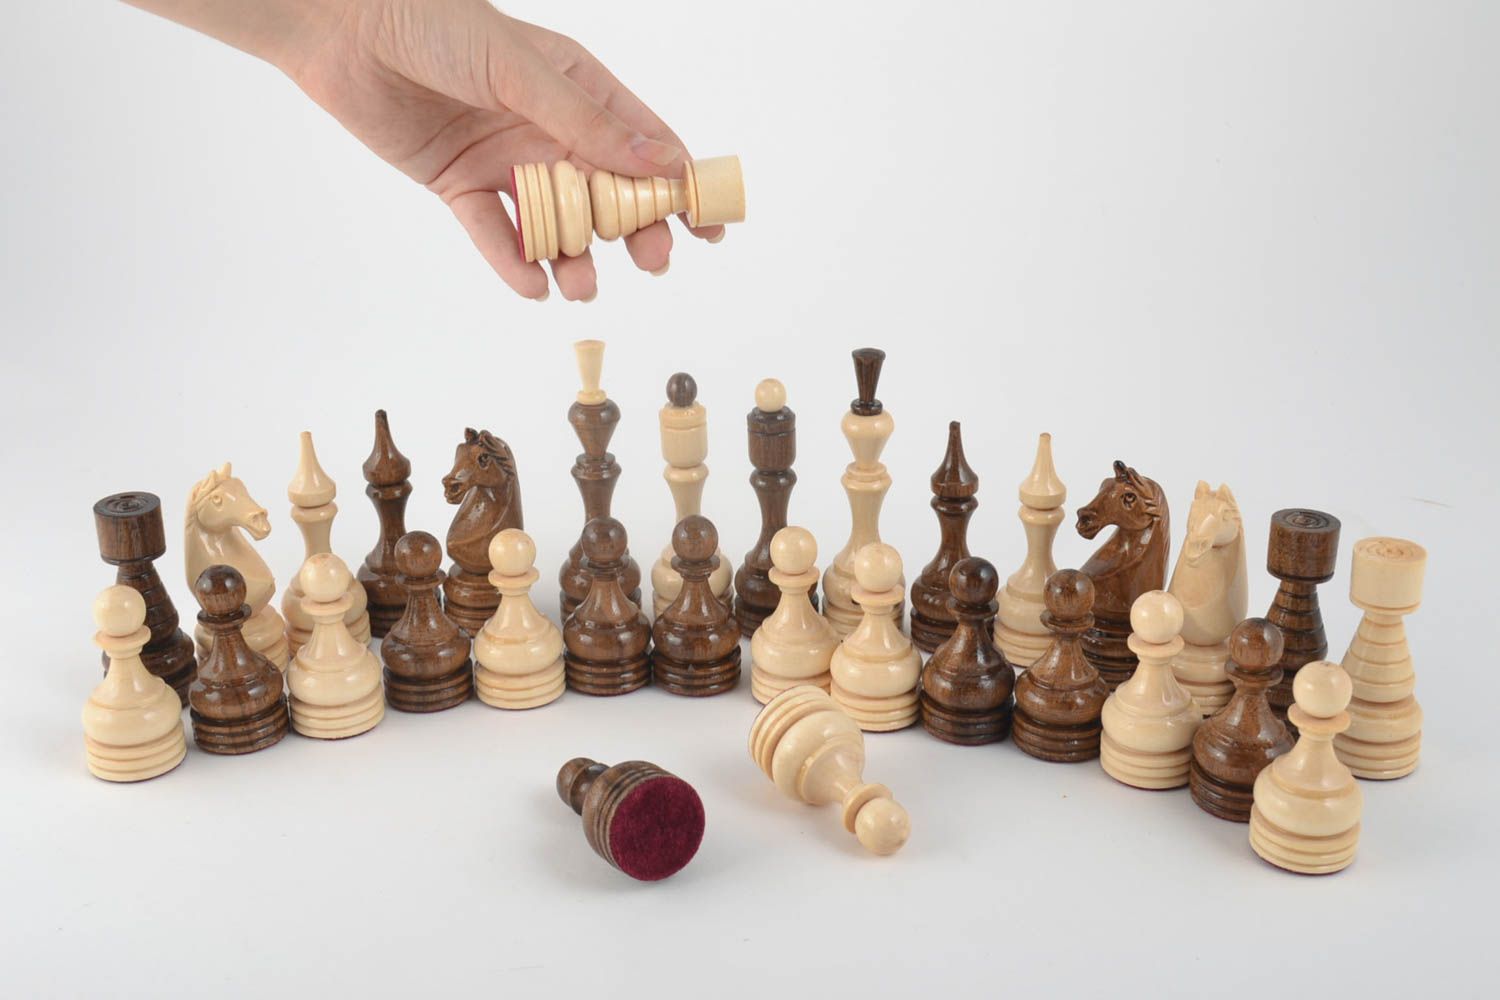 Unusual handmade wooden chessmen chess pieces board games best gifts for him photo 5